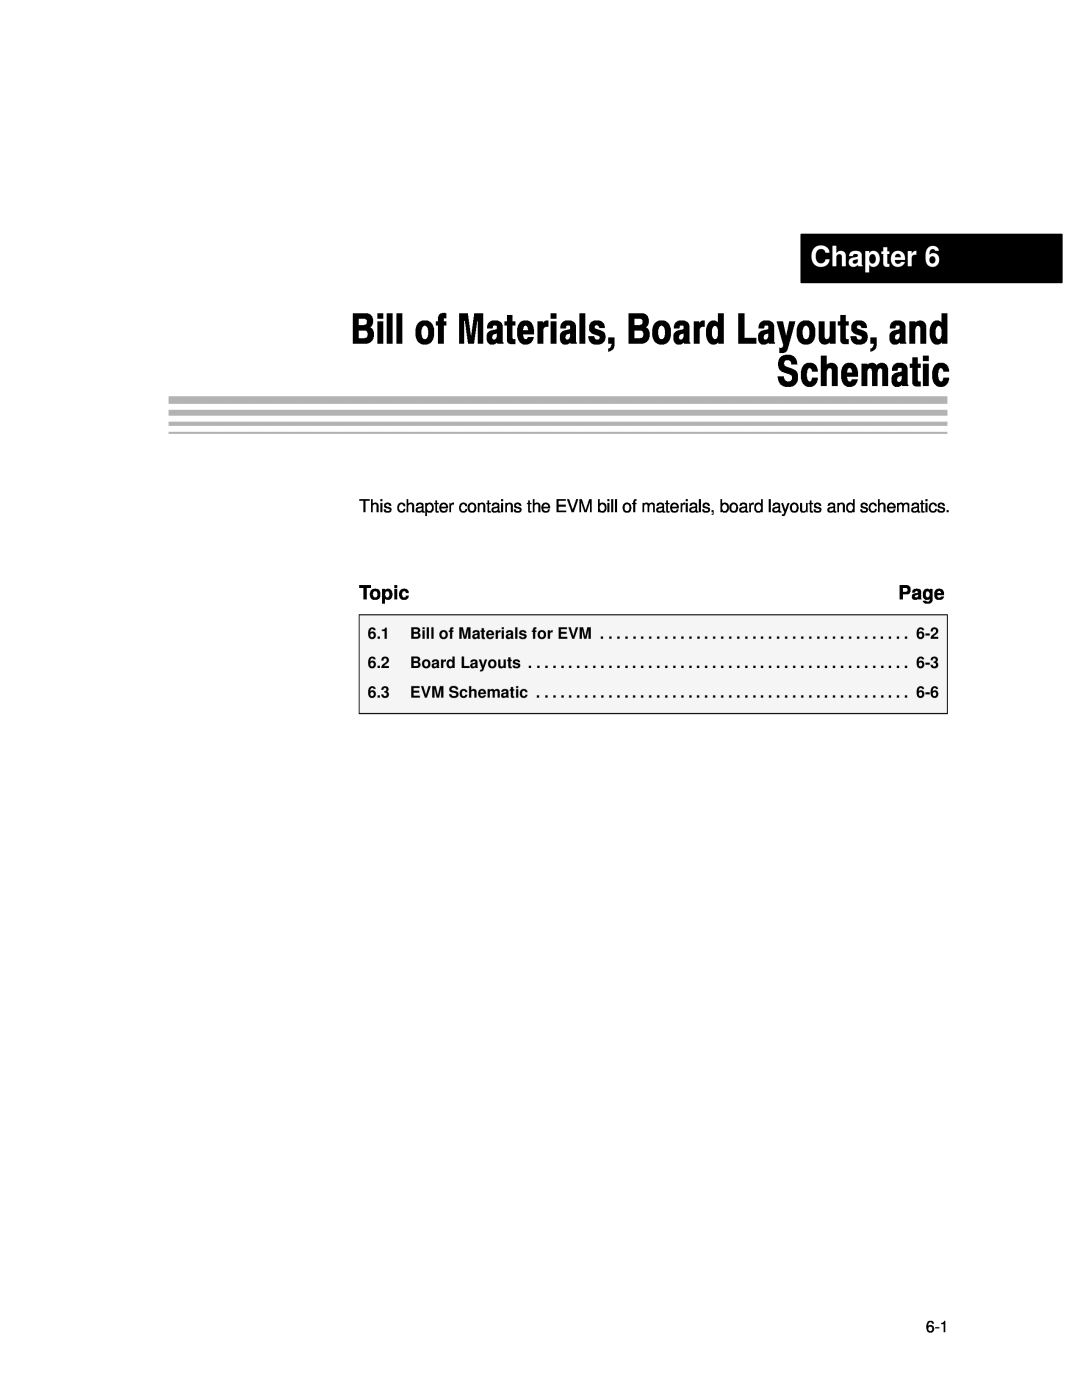 Texas Instruments TLC3578EVM manual Bill of Materials, Board Layouts, and Schematic, Chapter, Page, Topic, EVM Schematic 